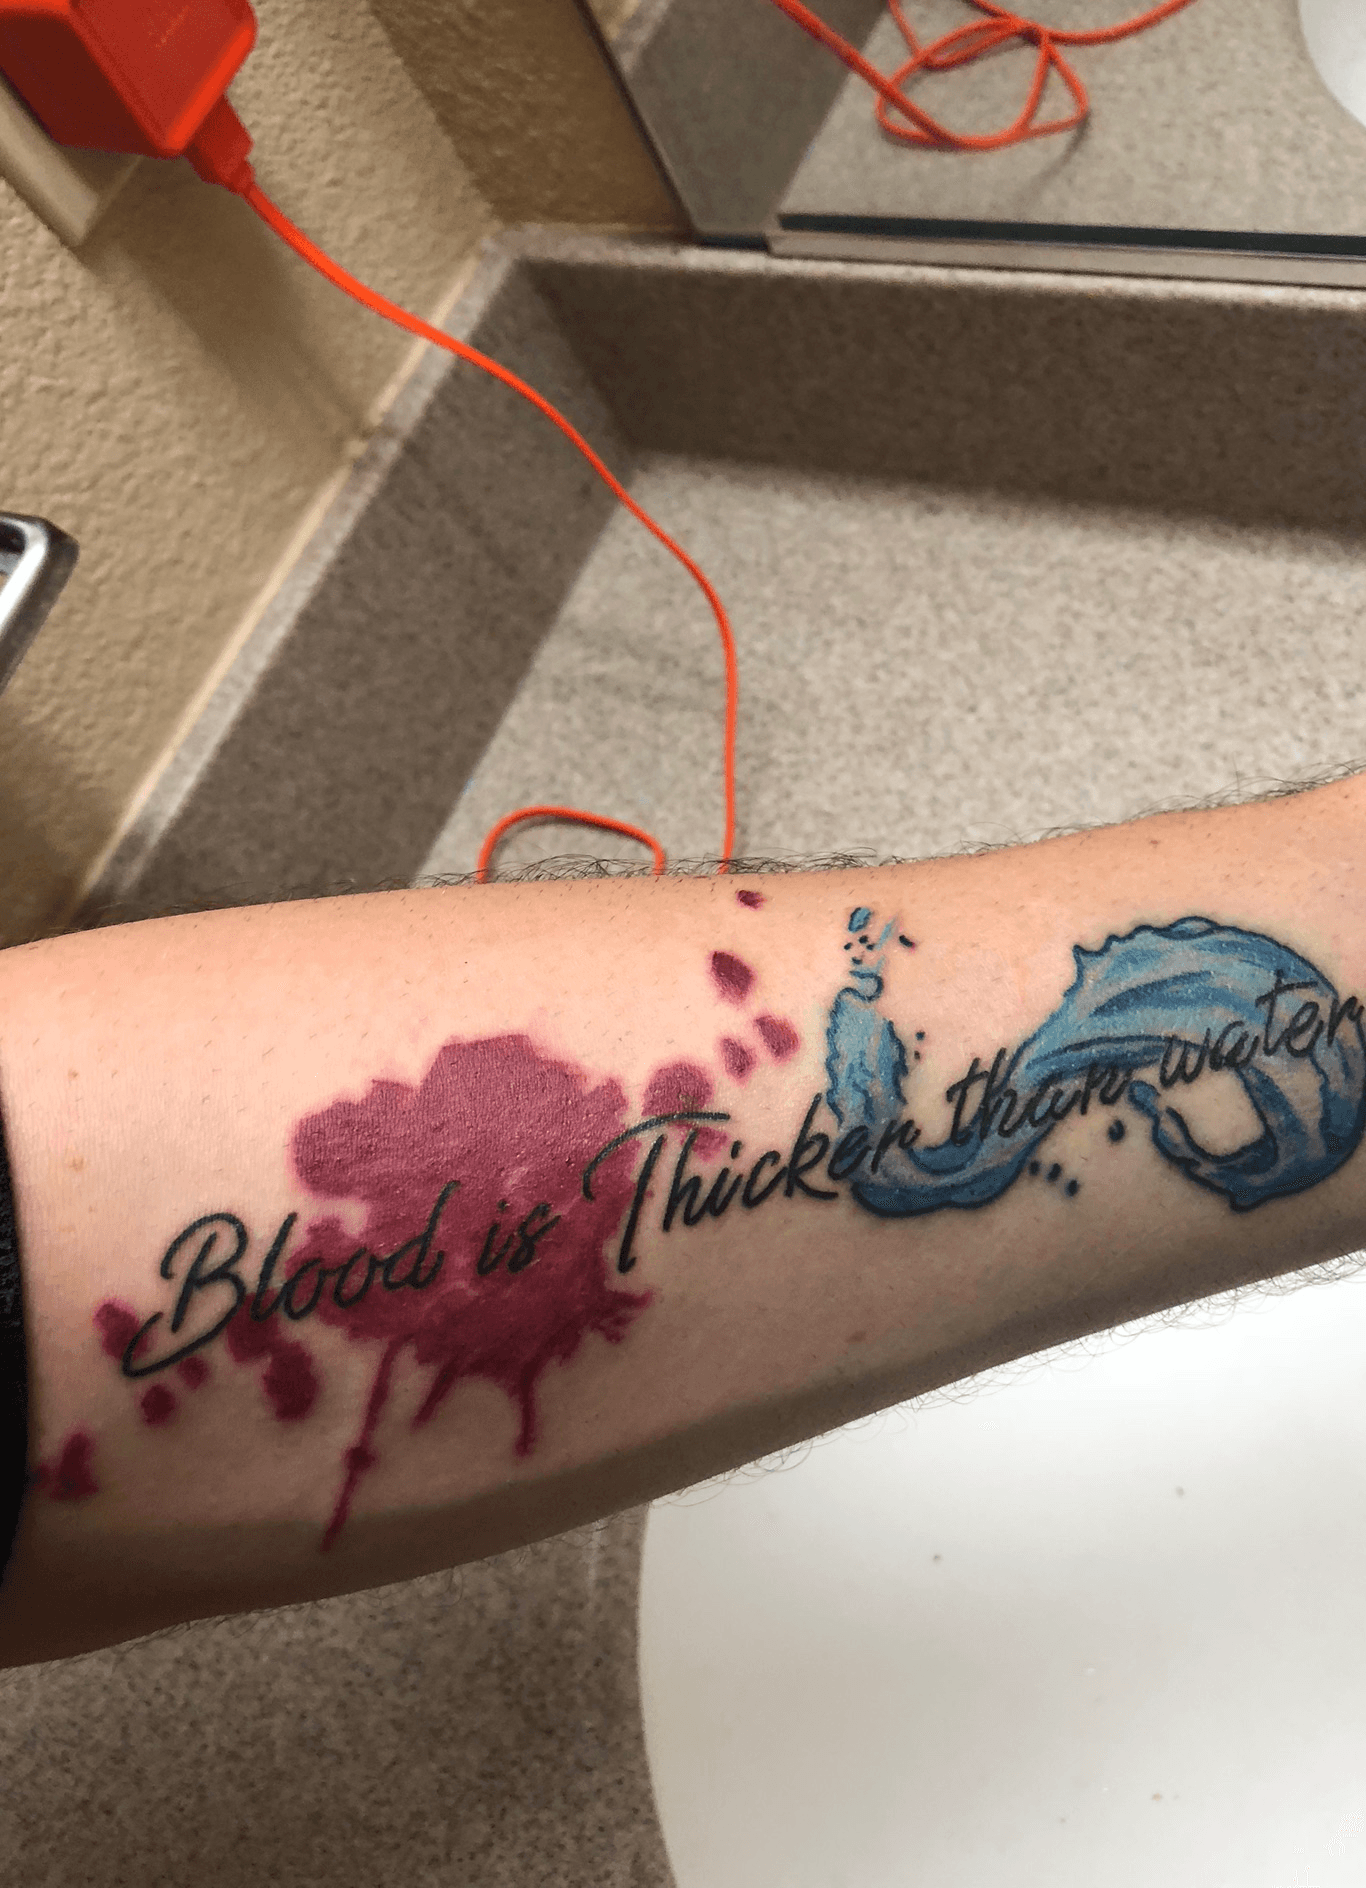 Tattoo uploaded by Blaze • While people have mixed views on what this  particular phrase's meaning and message is conveying I see it as that the  blood of which you share is